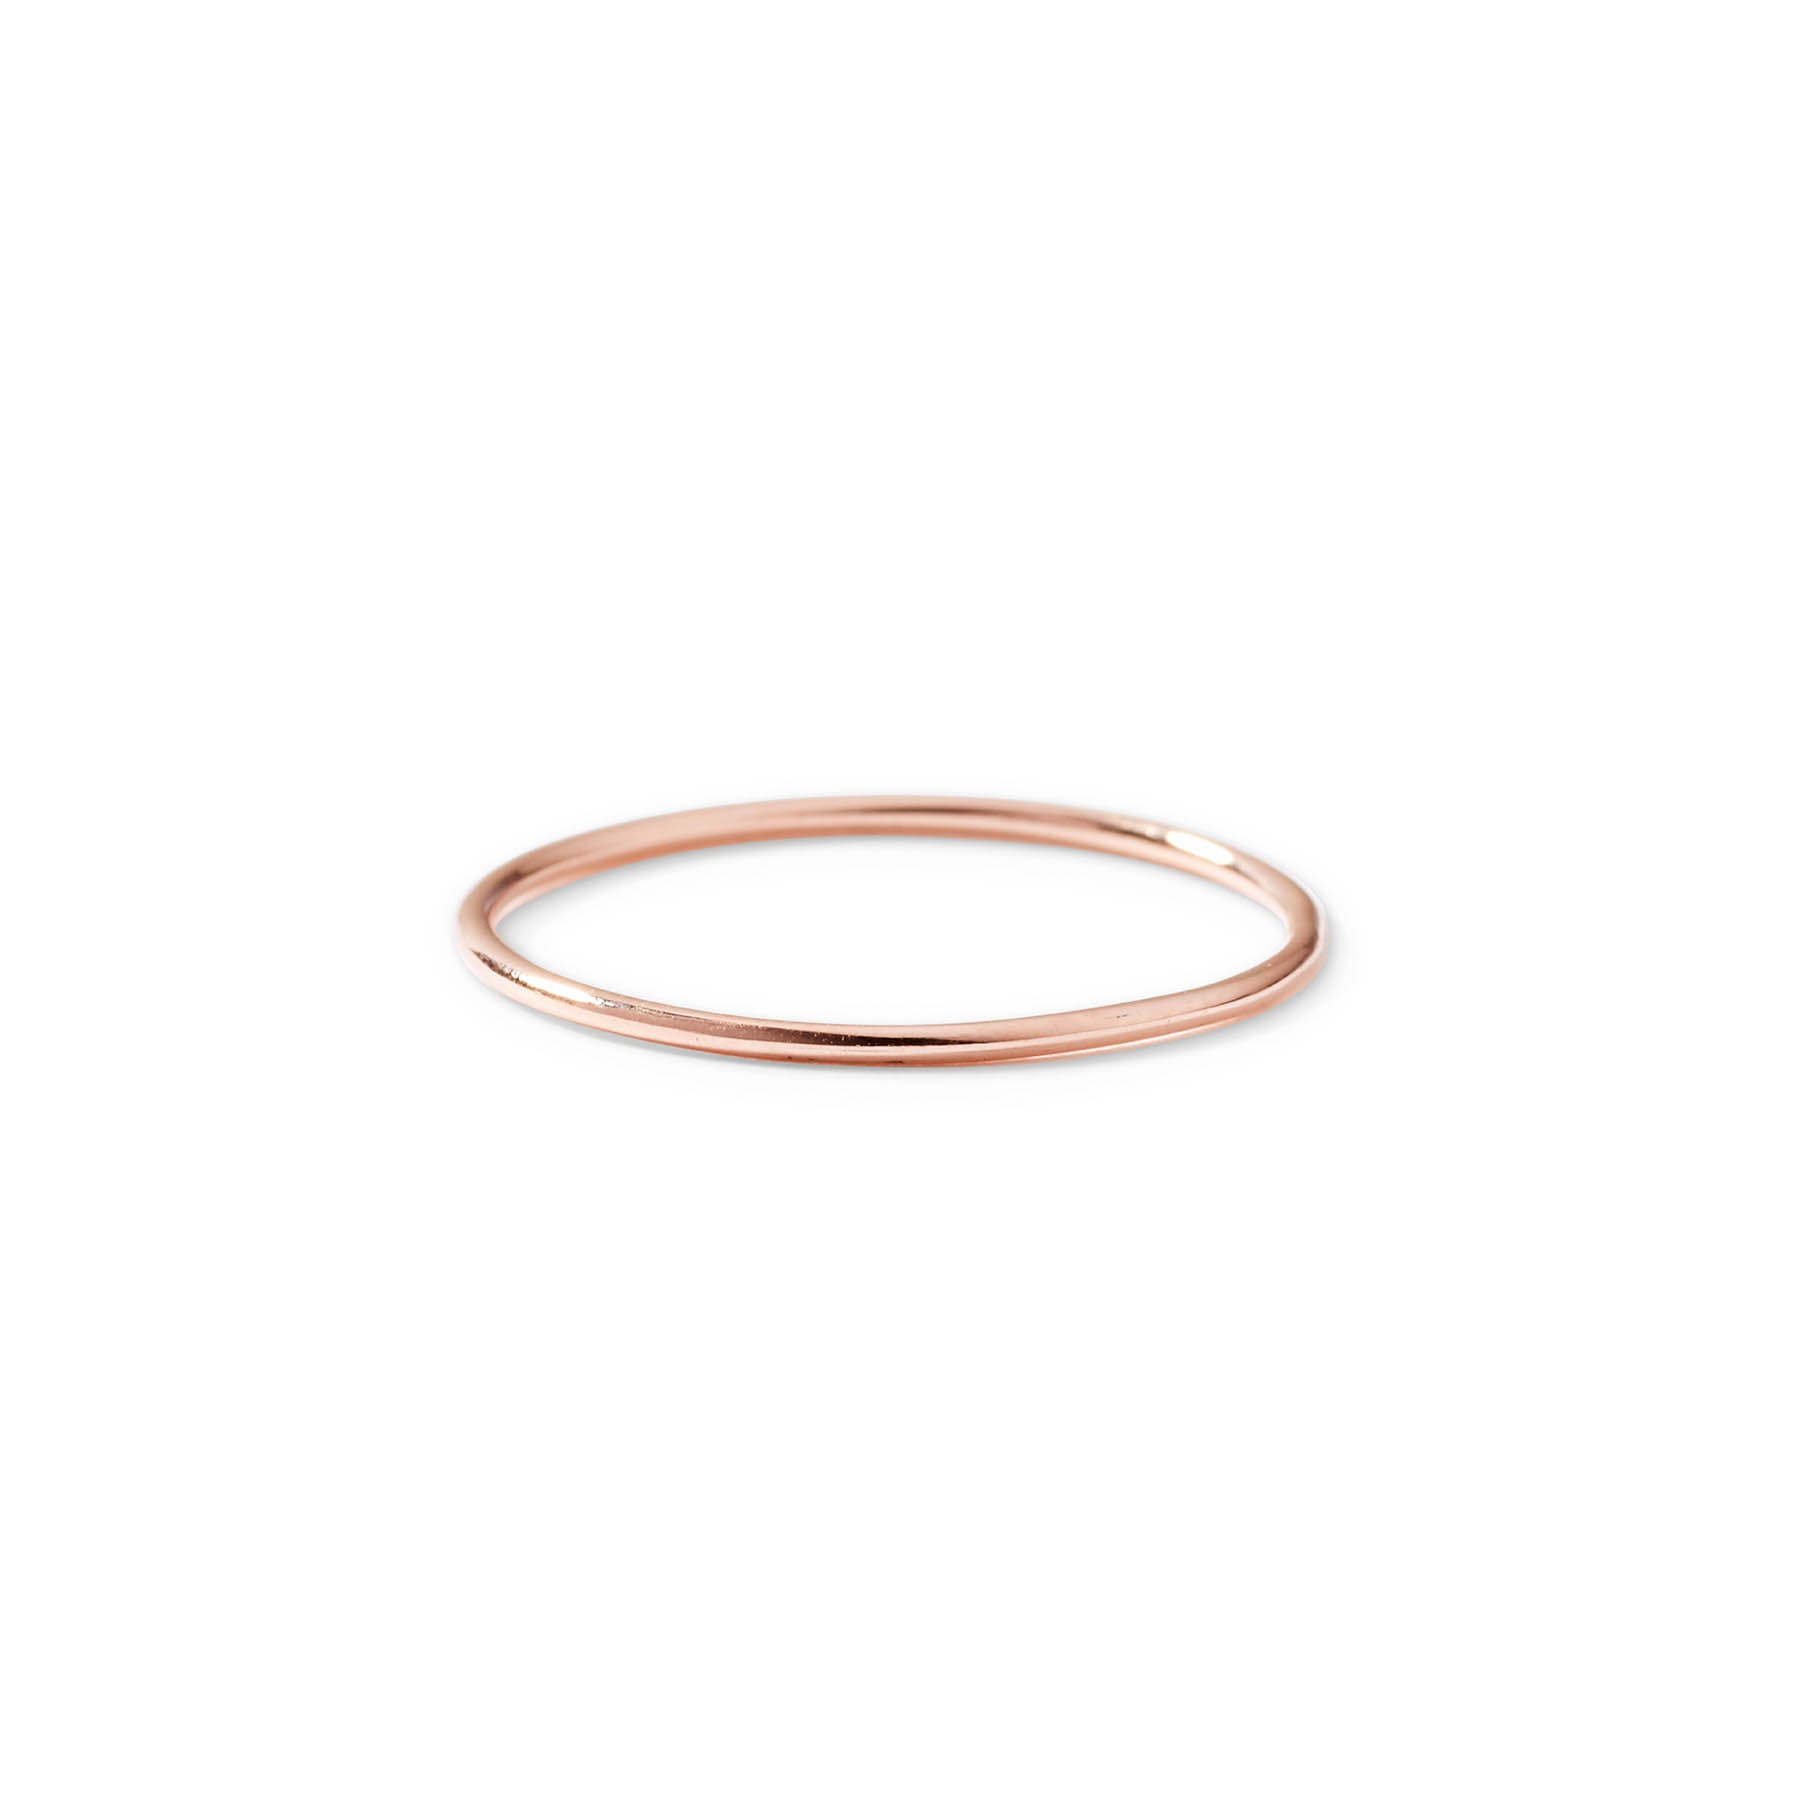 9ct rose gold dainty stack ring